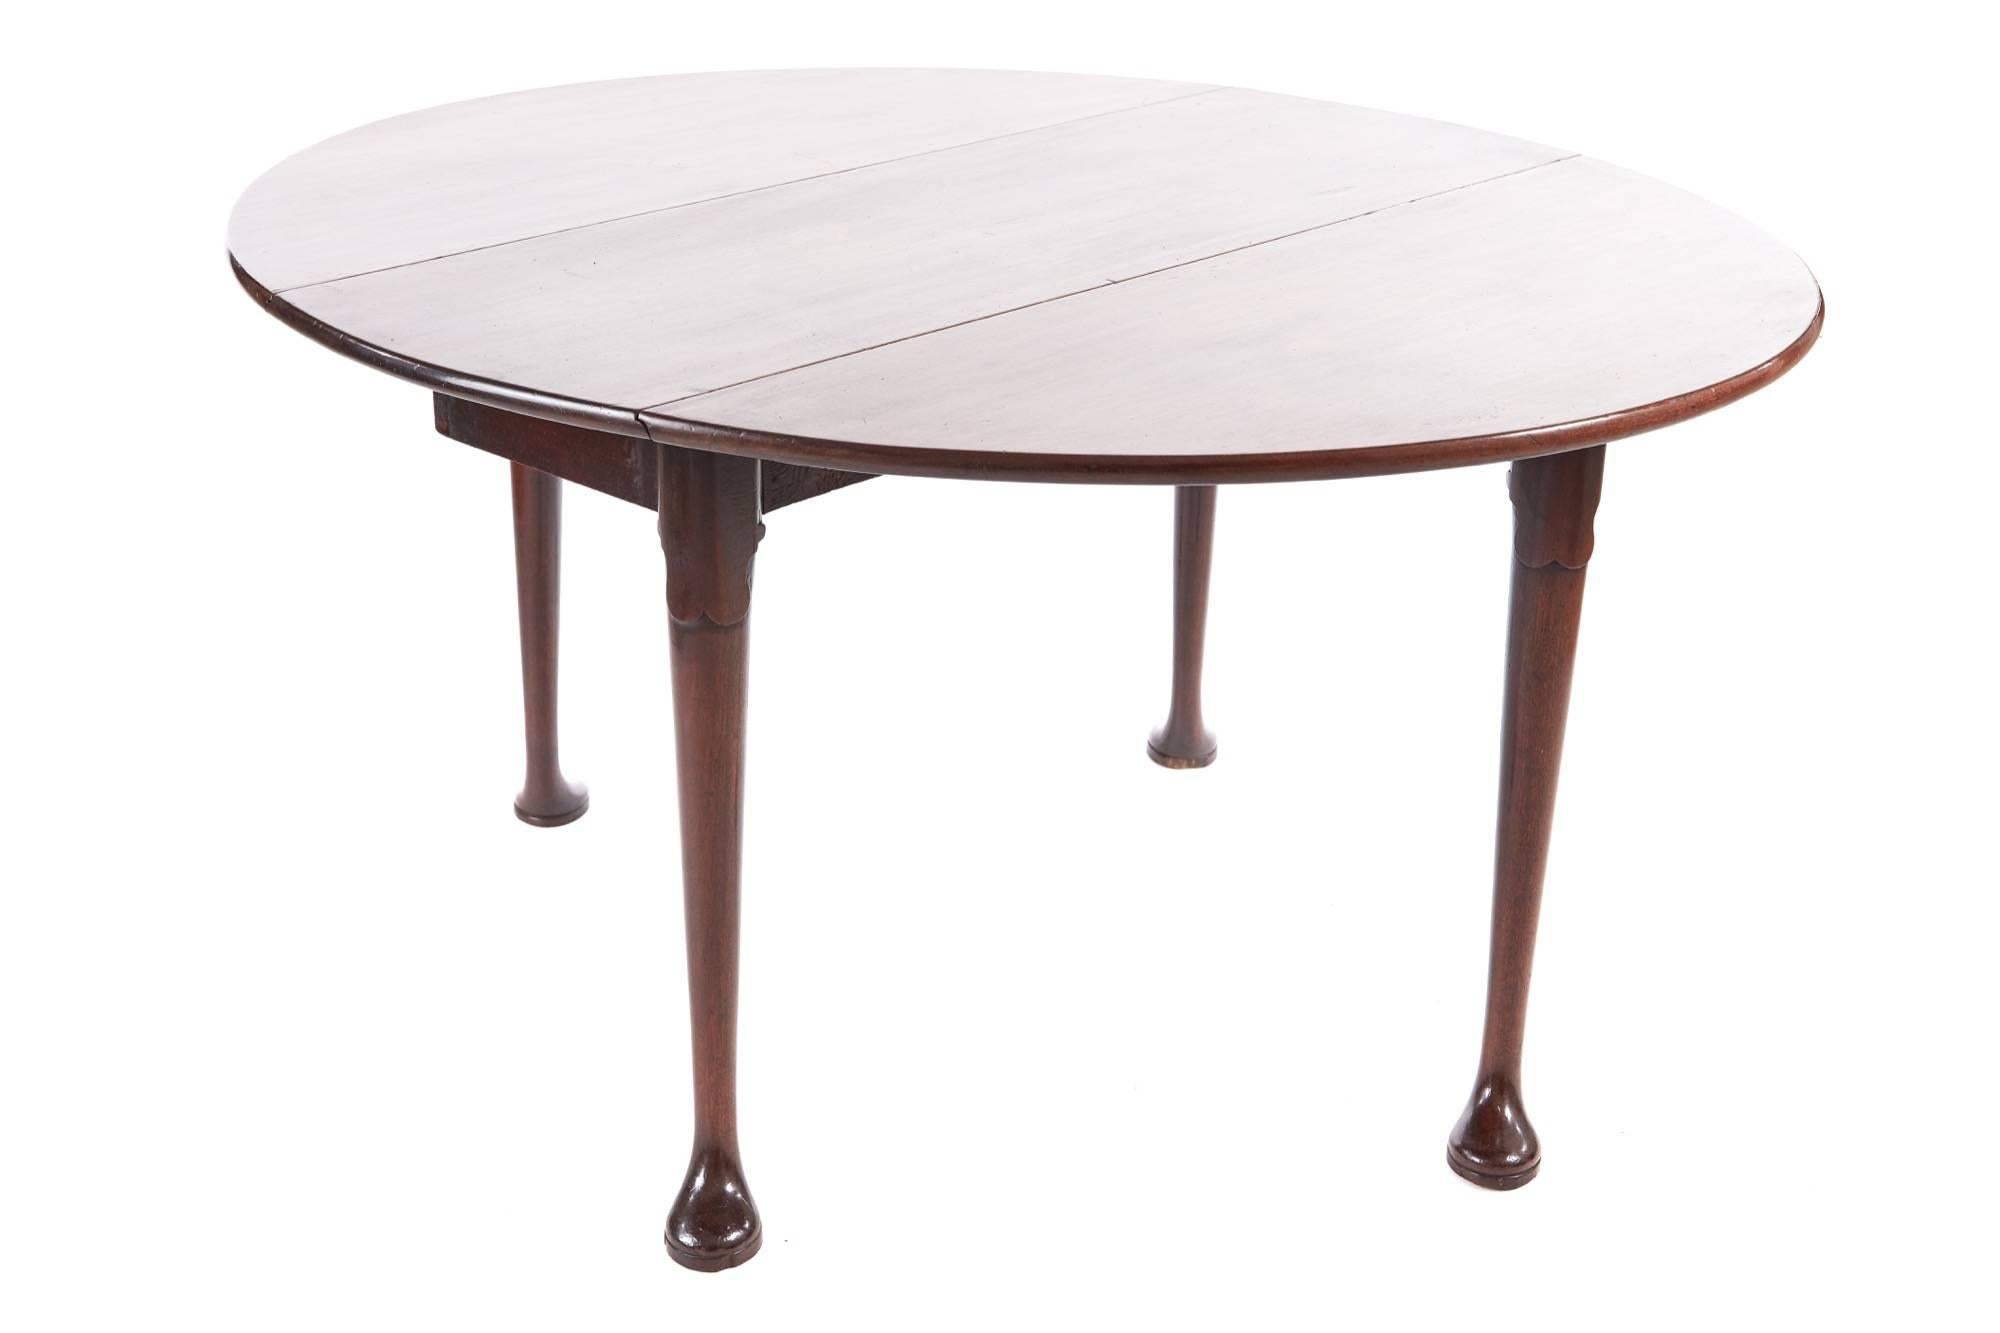 18th century Irish mahogany drop-leaf padfoot dining table, having a solid mahogany oval top with two drop leaves, supported by carved legs with a padfoot, very unusual
Lovely color and condition.